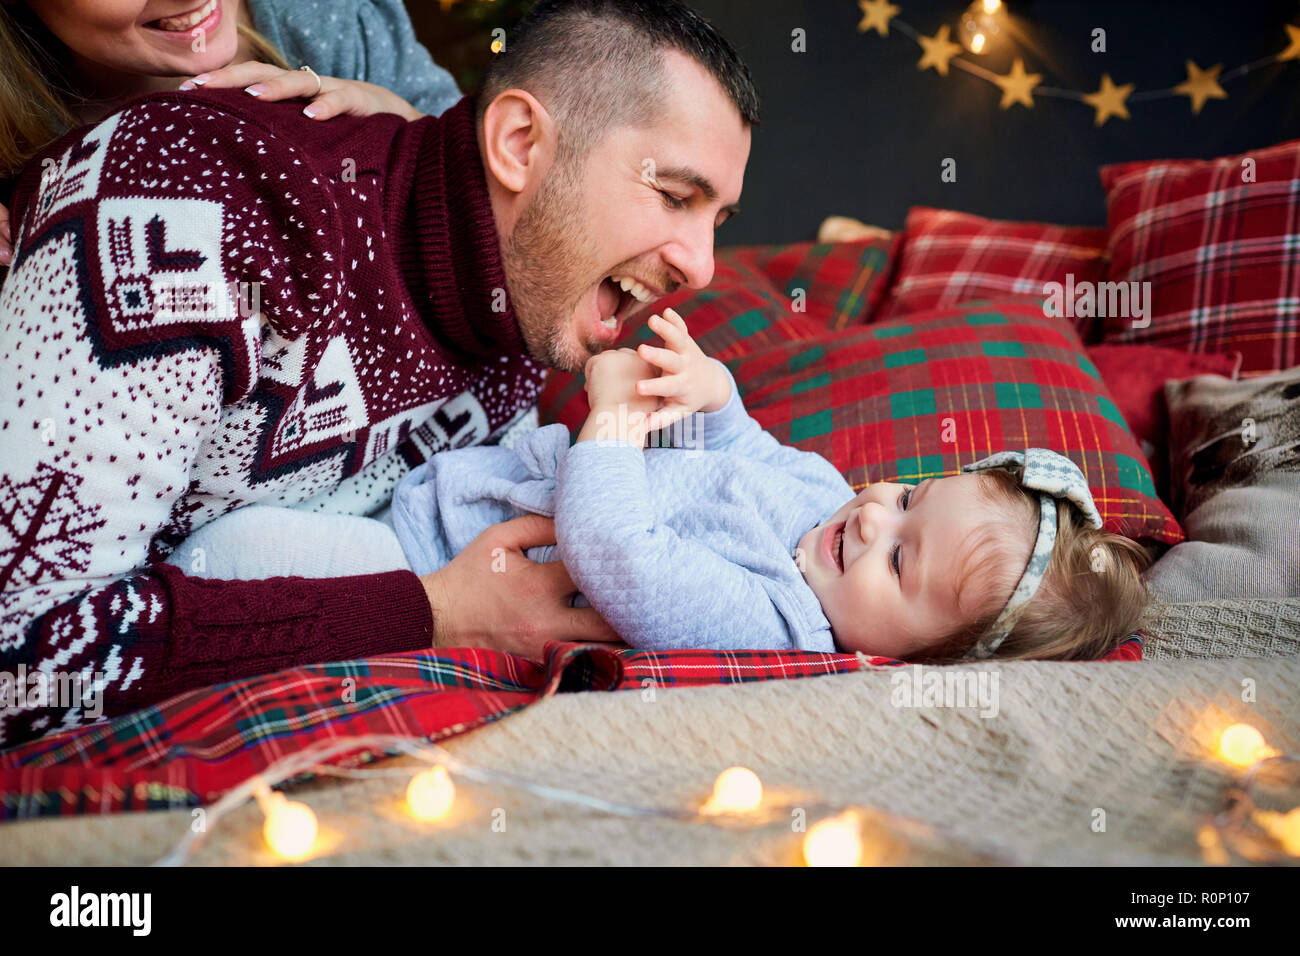 The family with child plays indoors on Christmas Day. Stock Photo